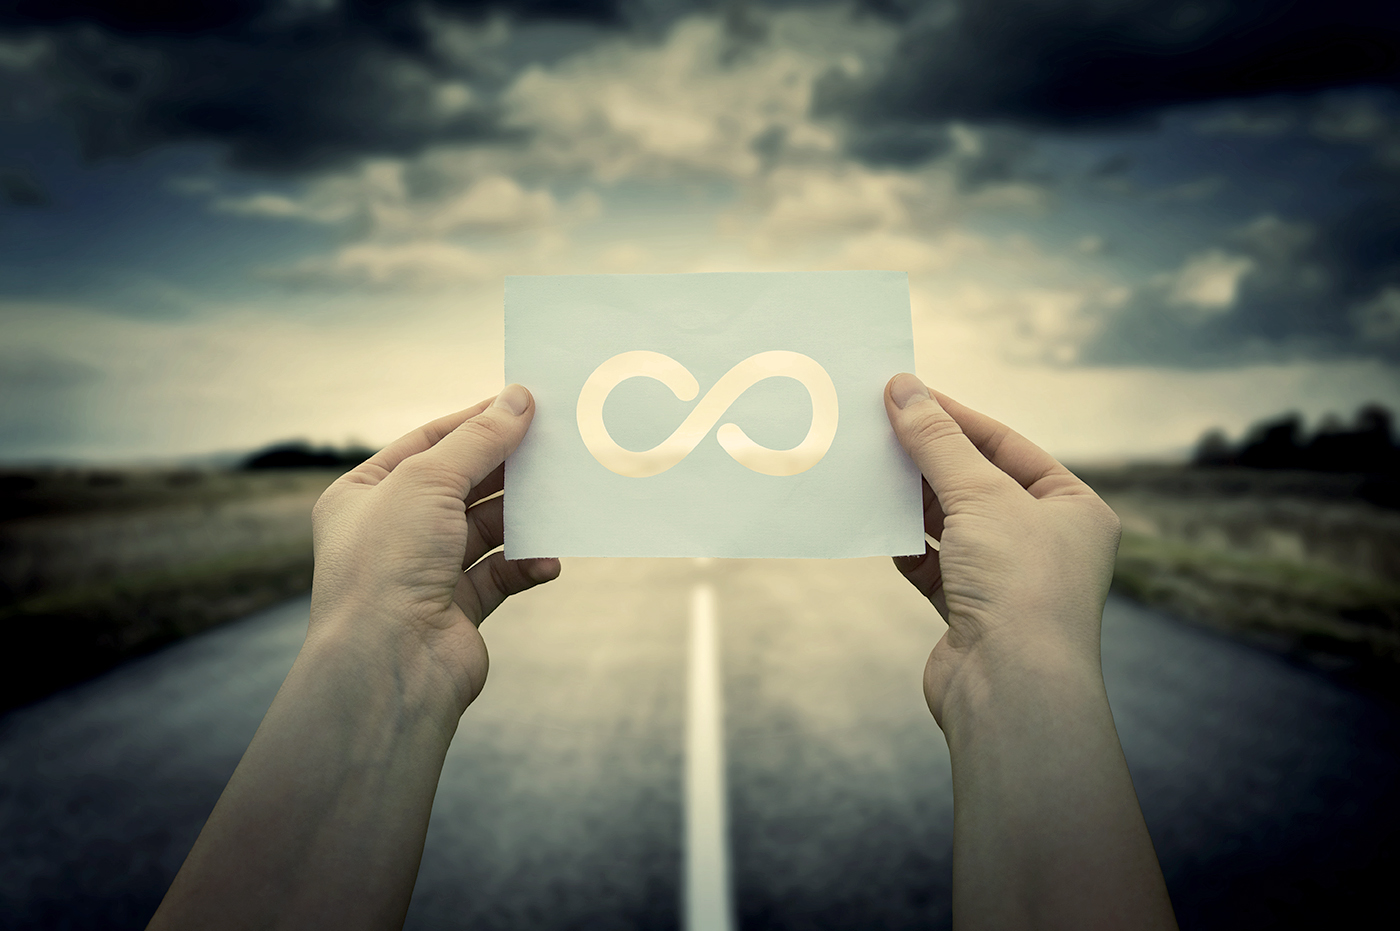 Hands holding an infinity-shaped cutout in front of a road.